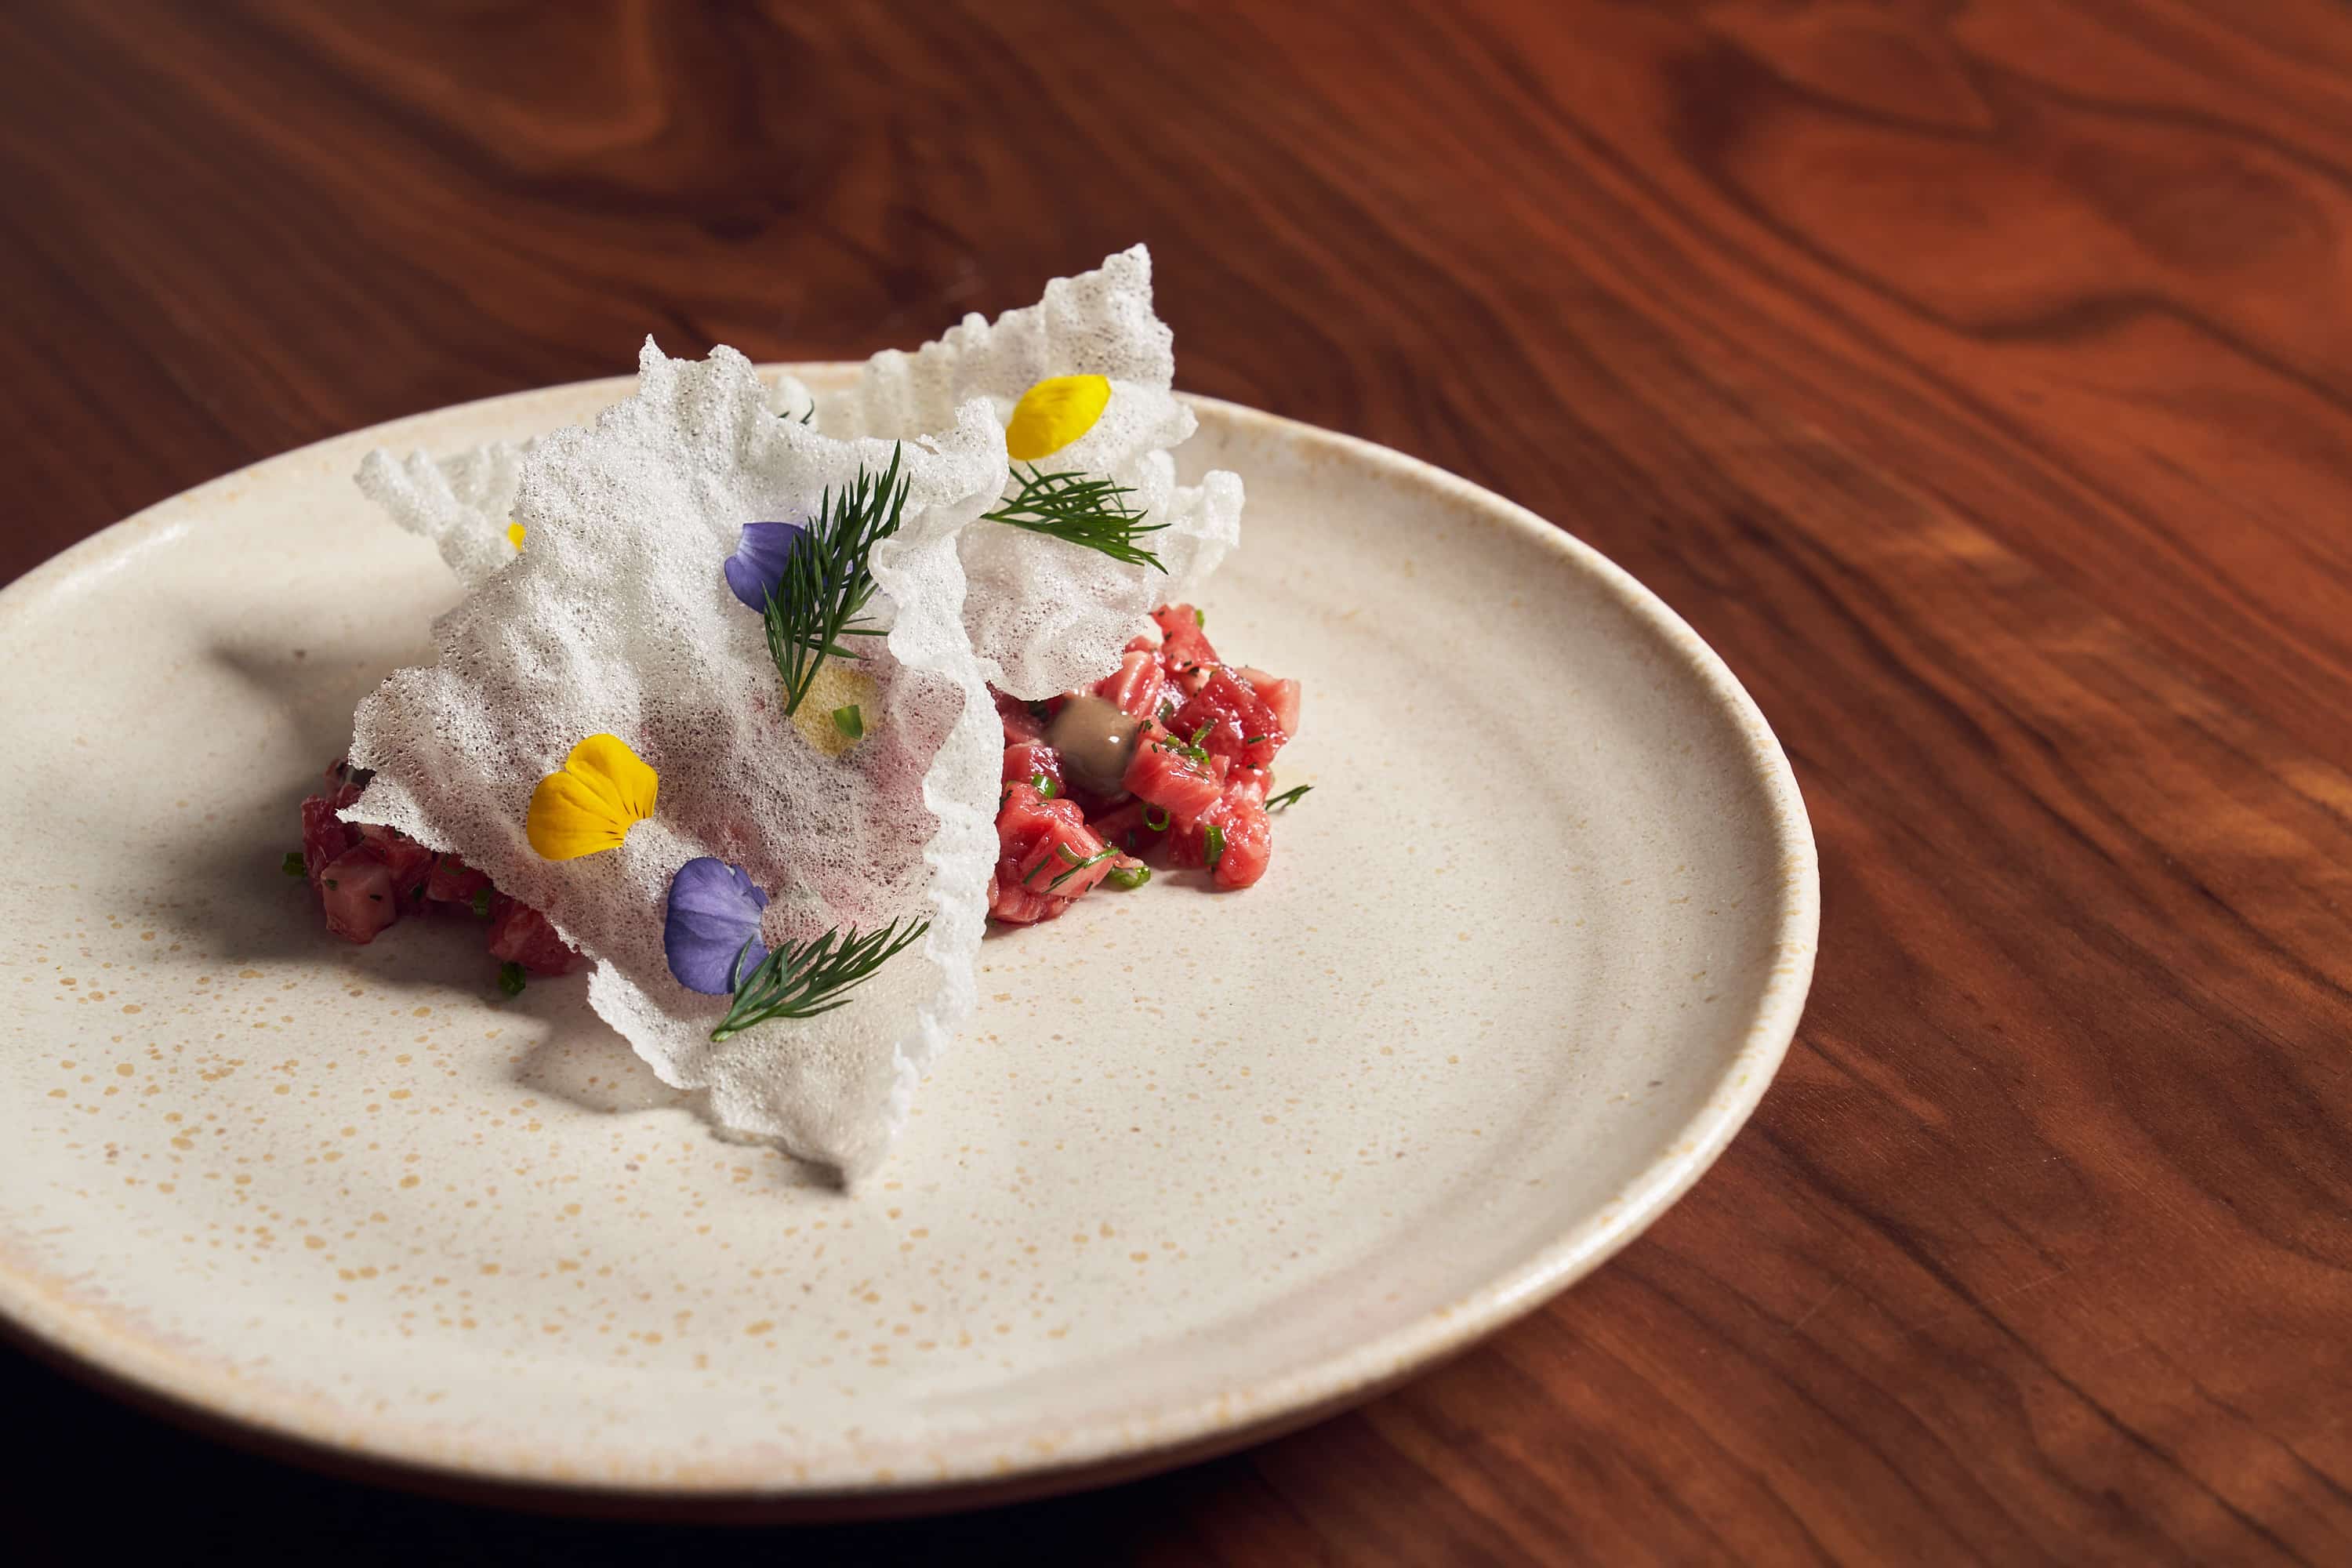 Wagyu Tartare served on a white plate.